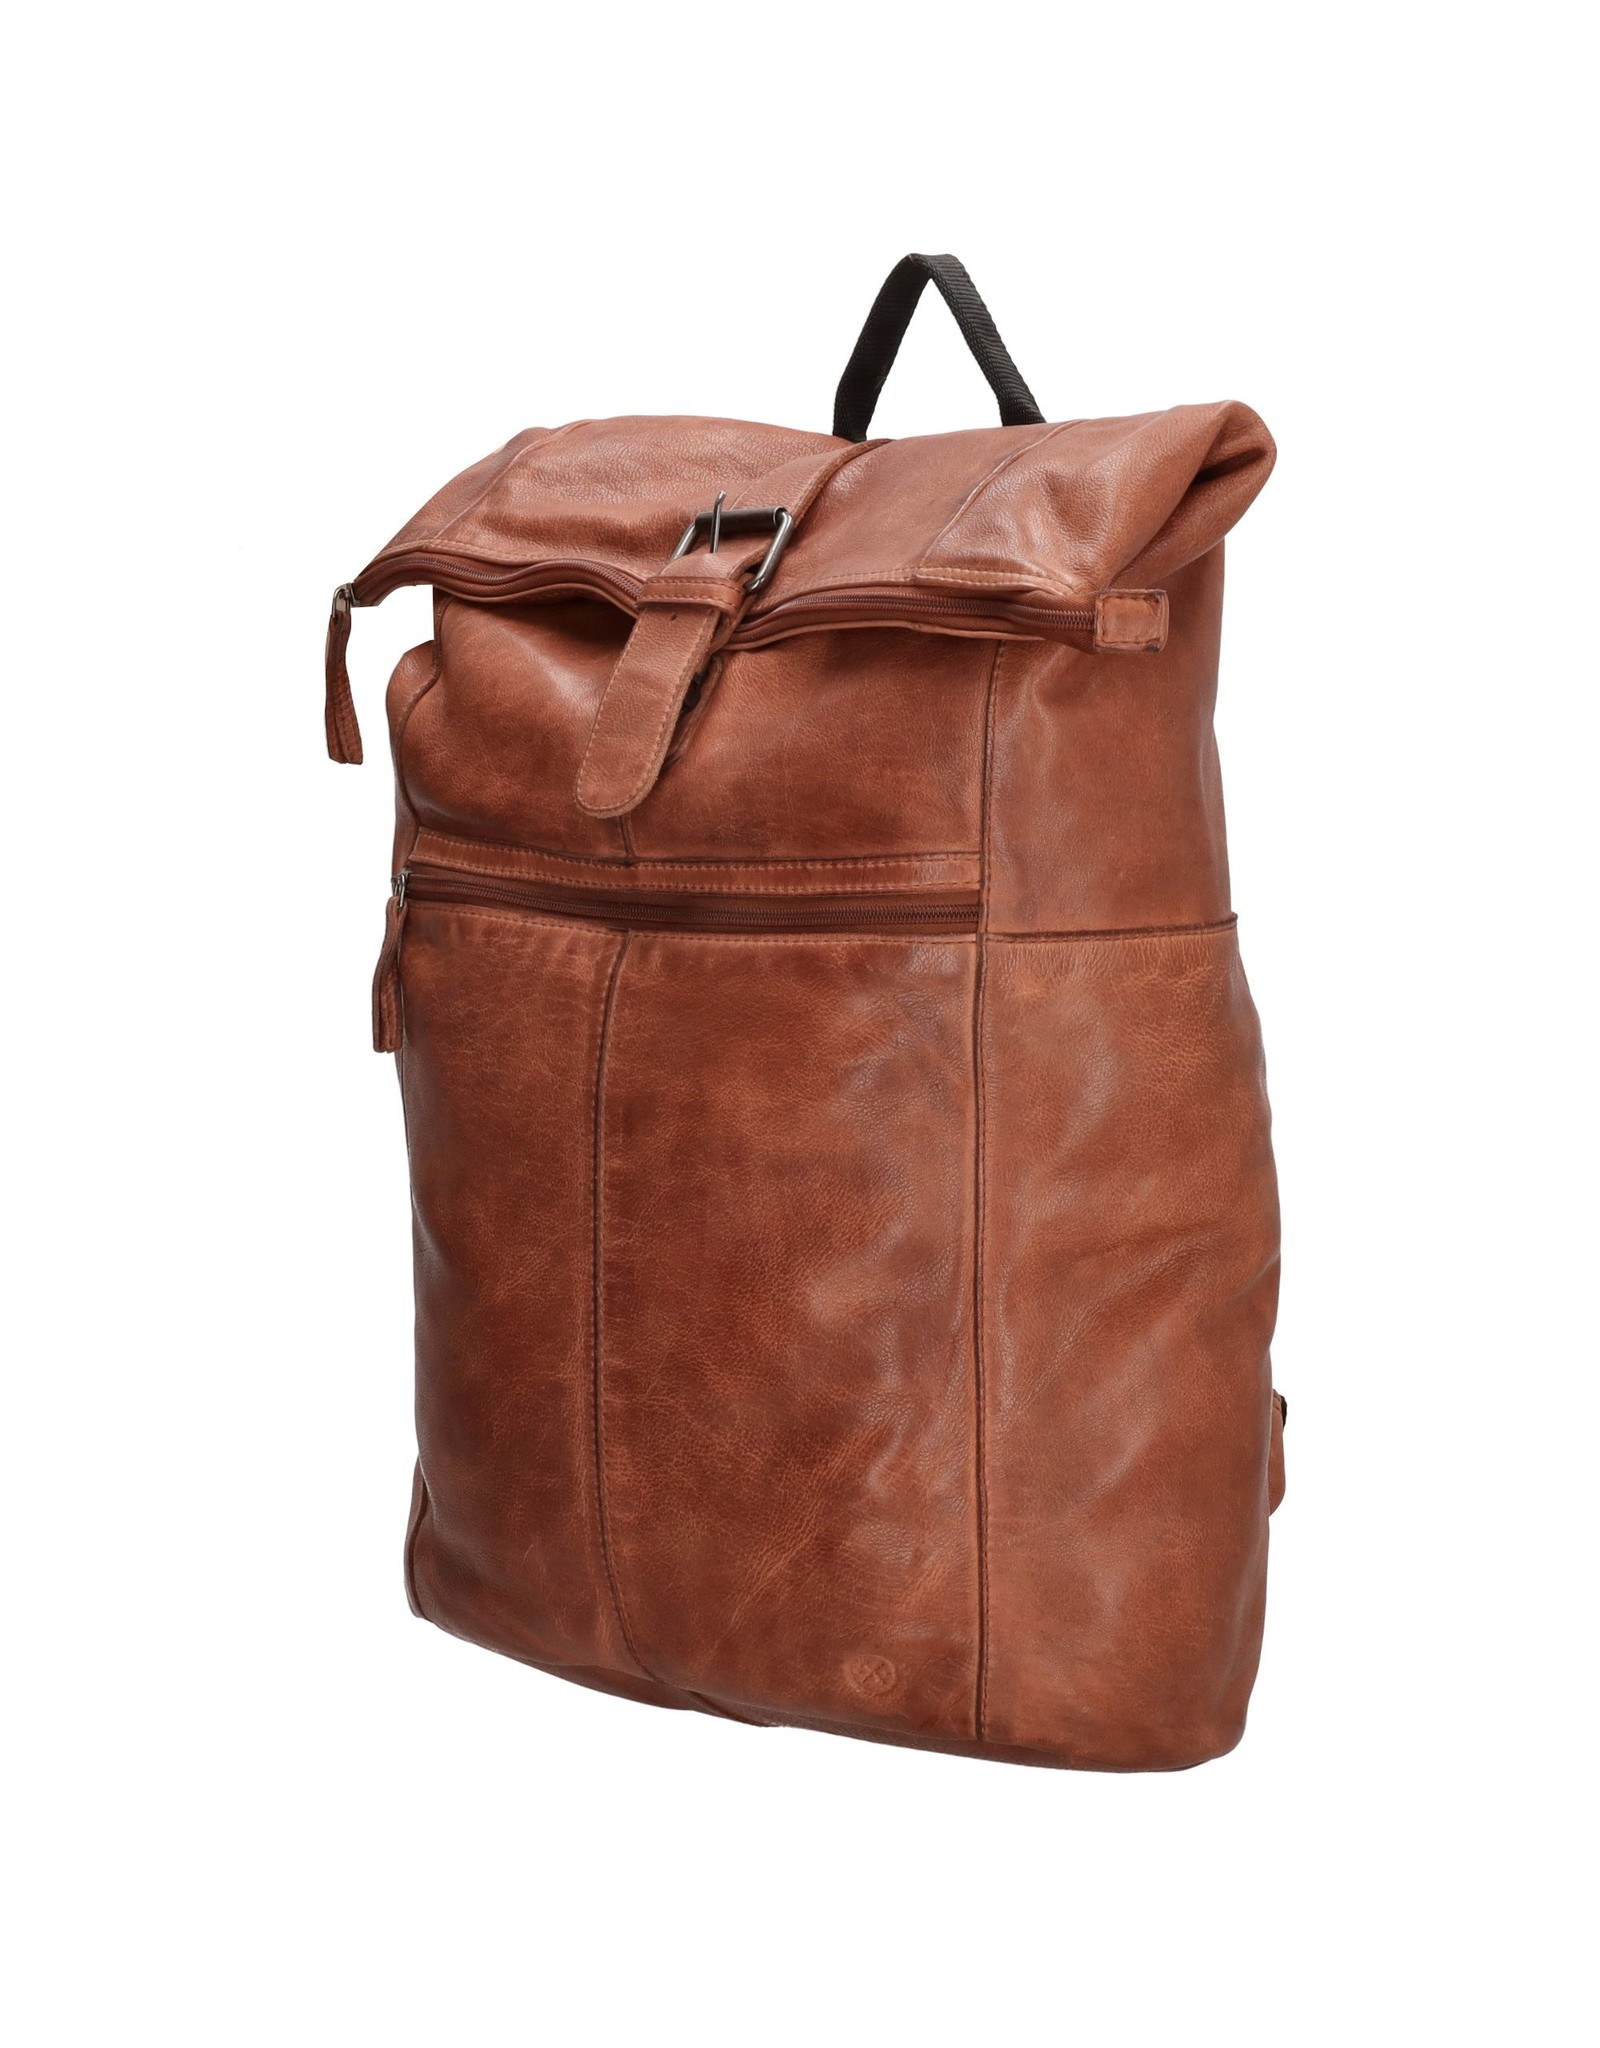 Hide & Stitches Leather backpacks  and leather shoppers - Hide & Stitches Rolltop Backpack 15,6" - 17,3" dark cognac